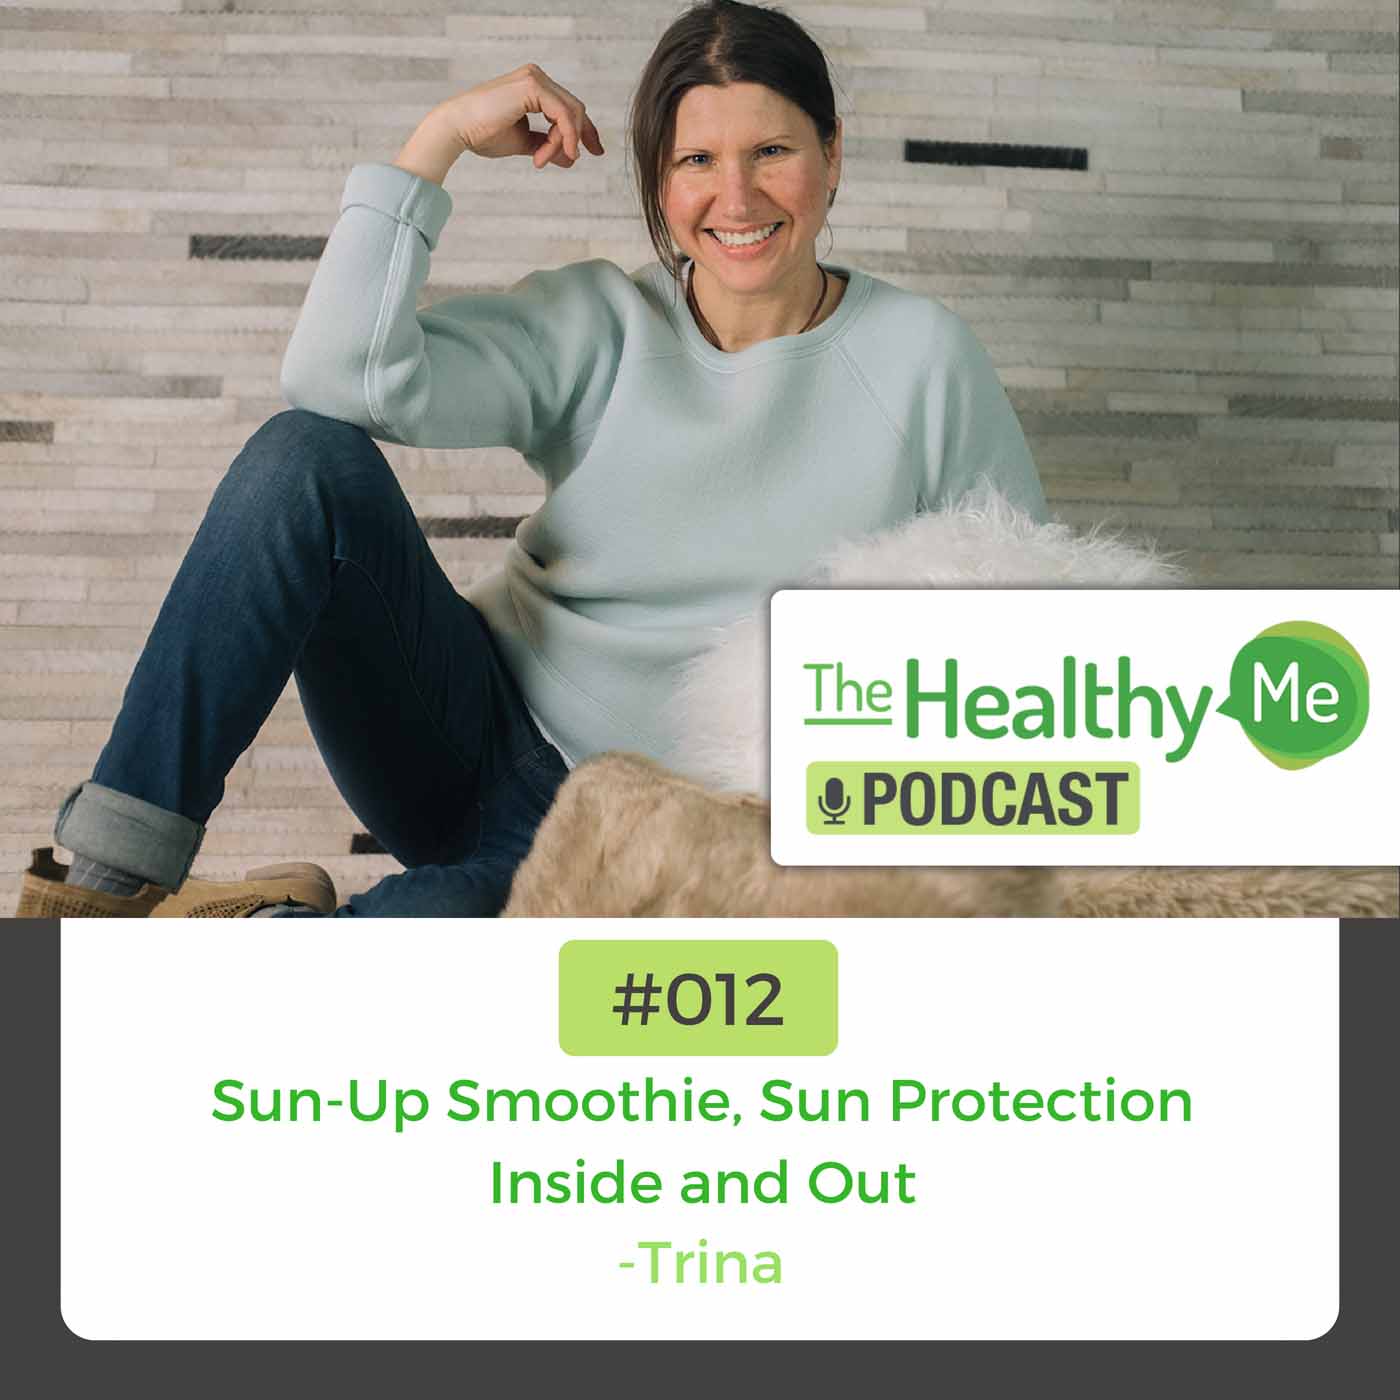 Sun-Up Smoothie Sun Protection Inside and Out | The Healthy Me Podcast Episode 012